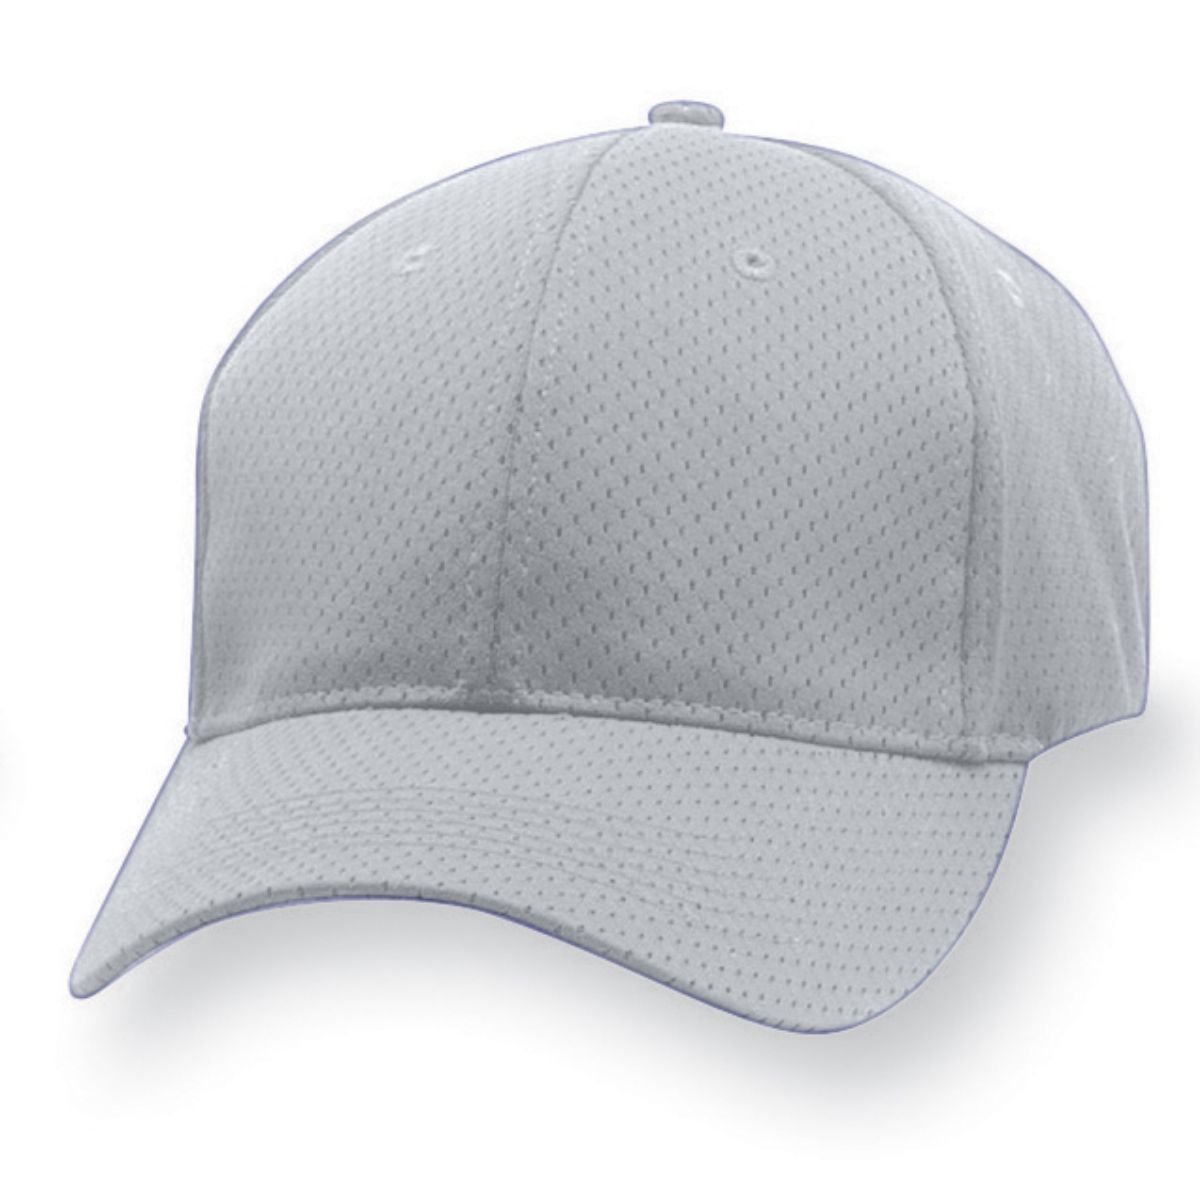 Augusta Sportswear Sport Flex Athletic Mesh Cap in Silver Grey  -Part of the Adult, Augusta-Products, Headwear, Headwear-Cap product lines at KanaleyCreations.com